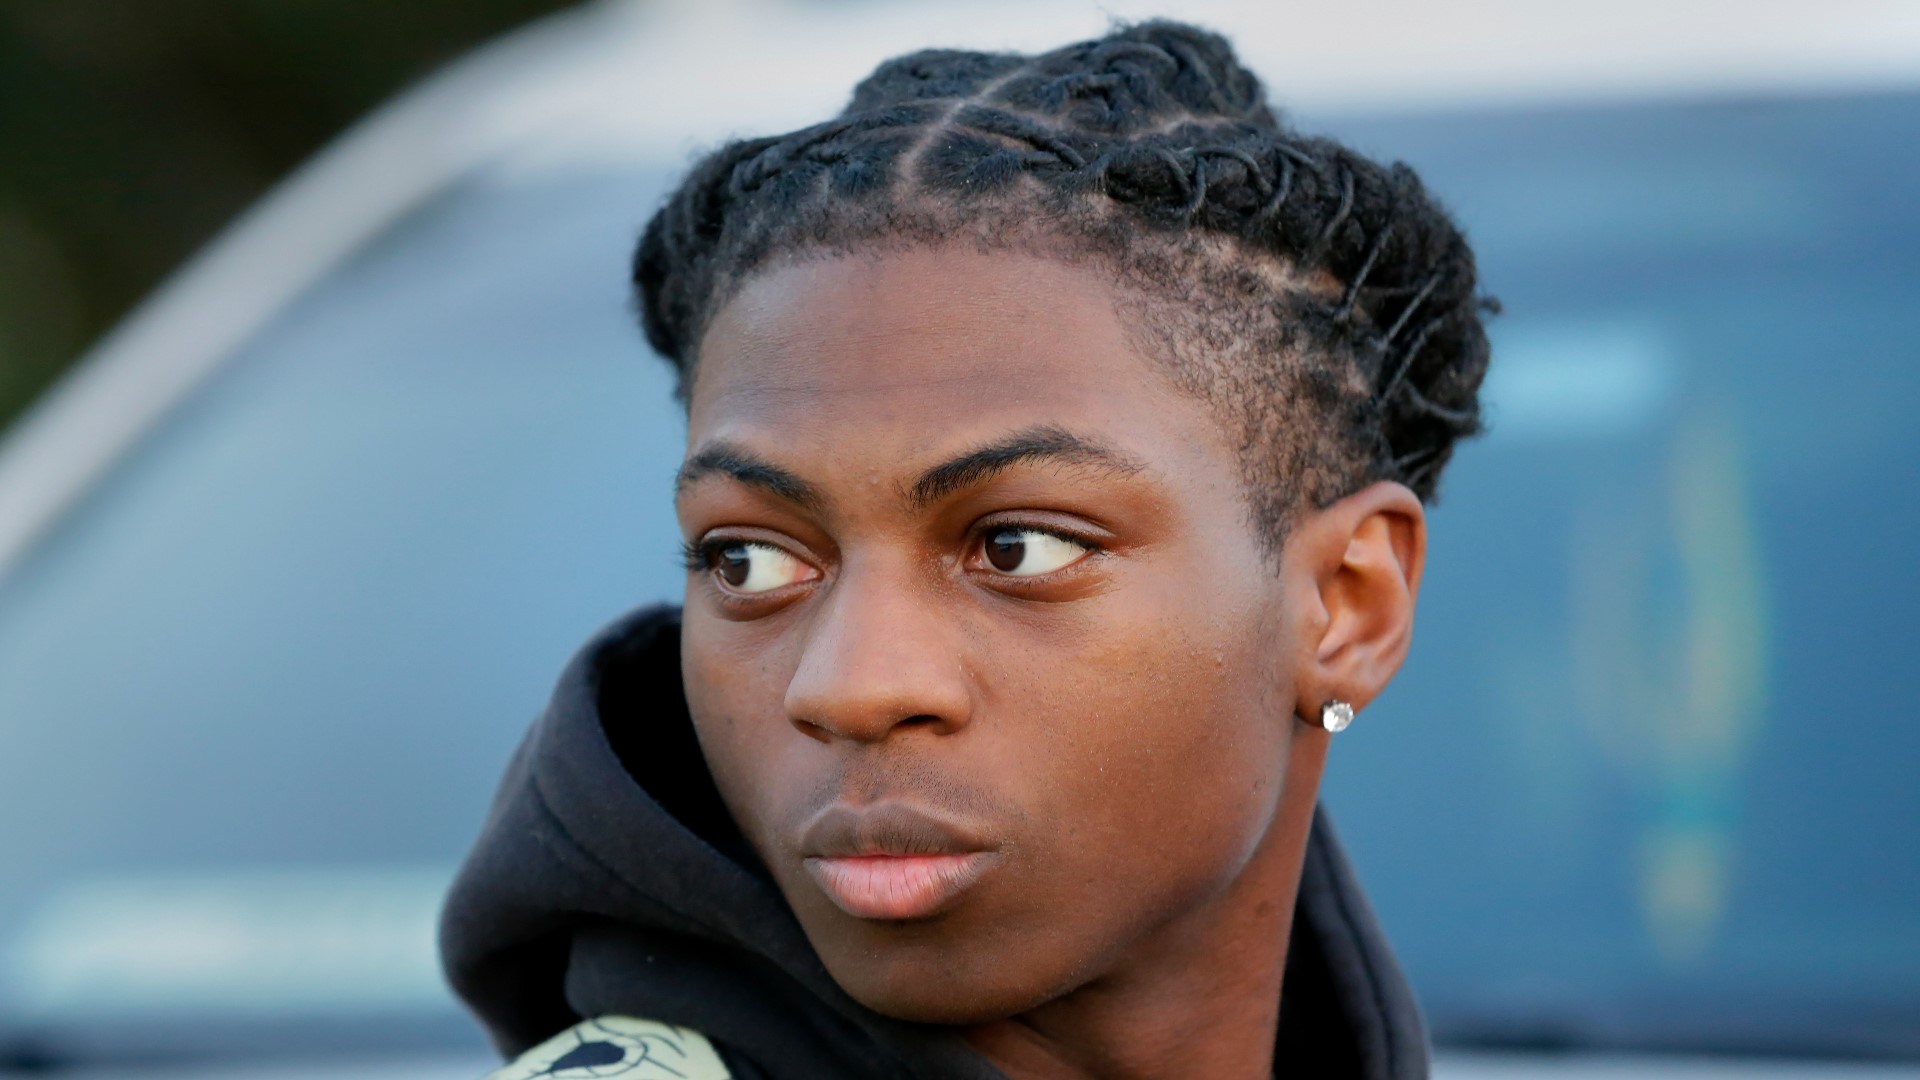 Darryl George, a junior at Barbers Hill High School, was initially suspended the same week Texas outlawed racial discrimination based on hairstyles.